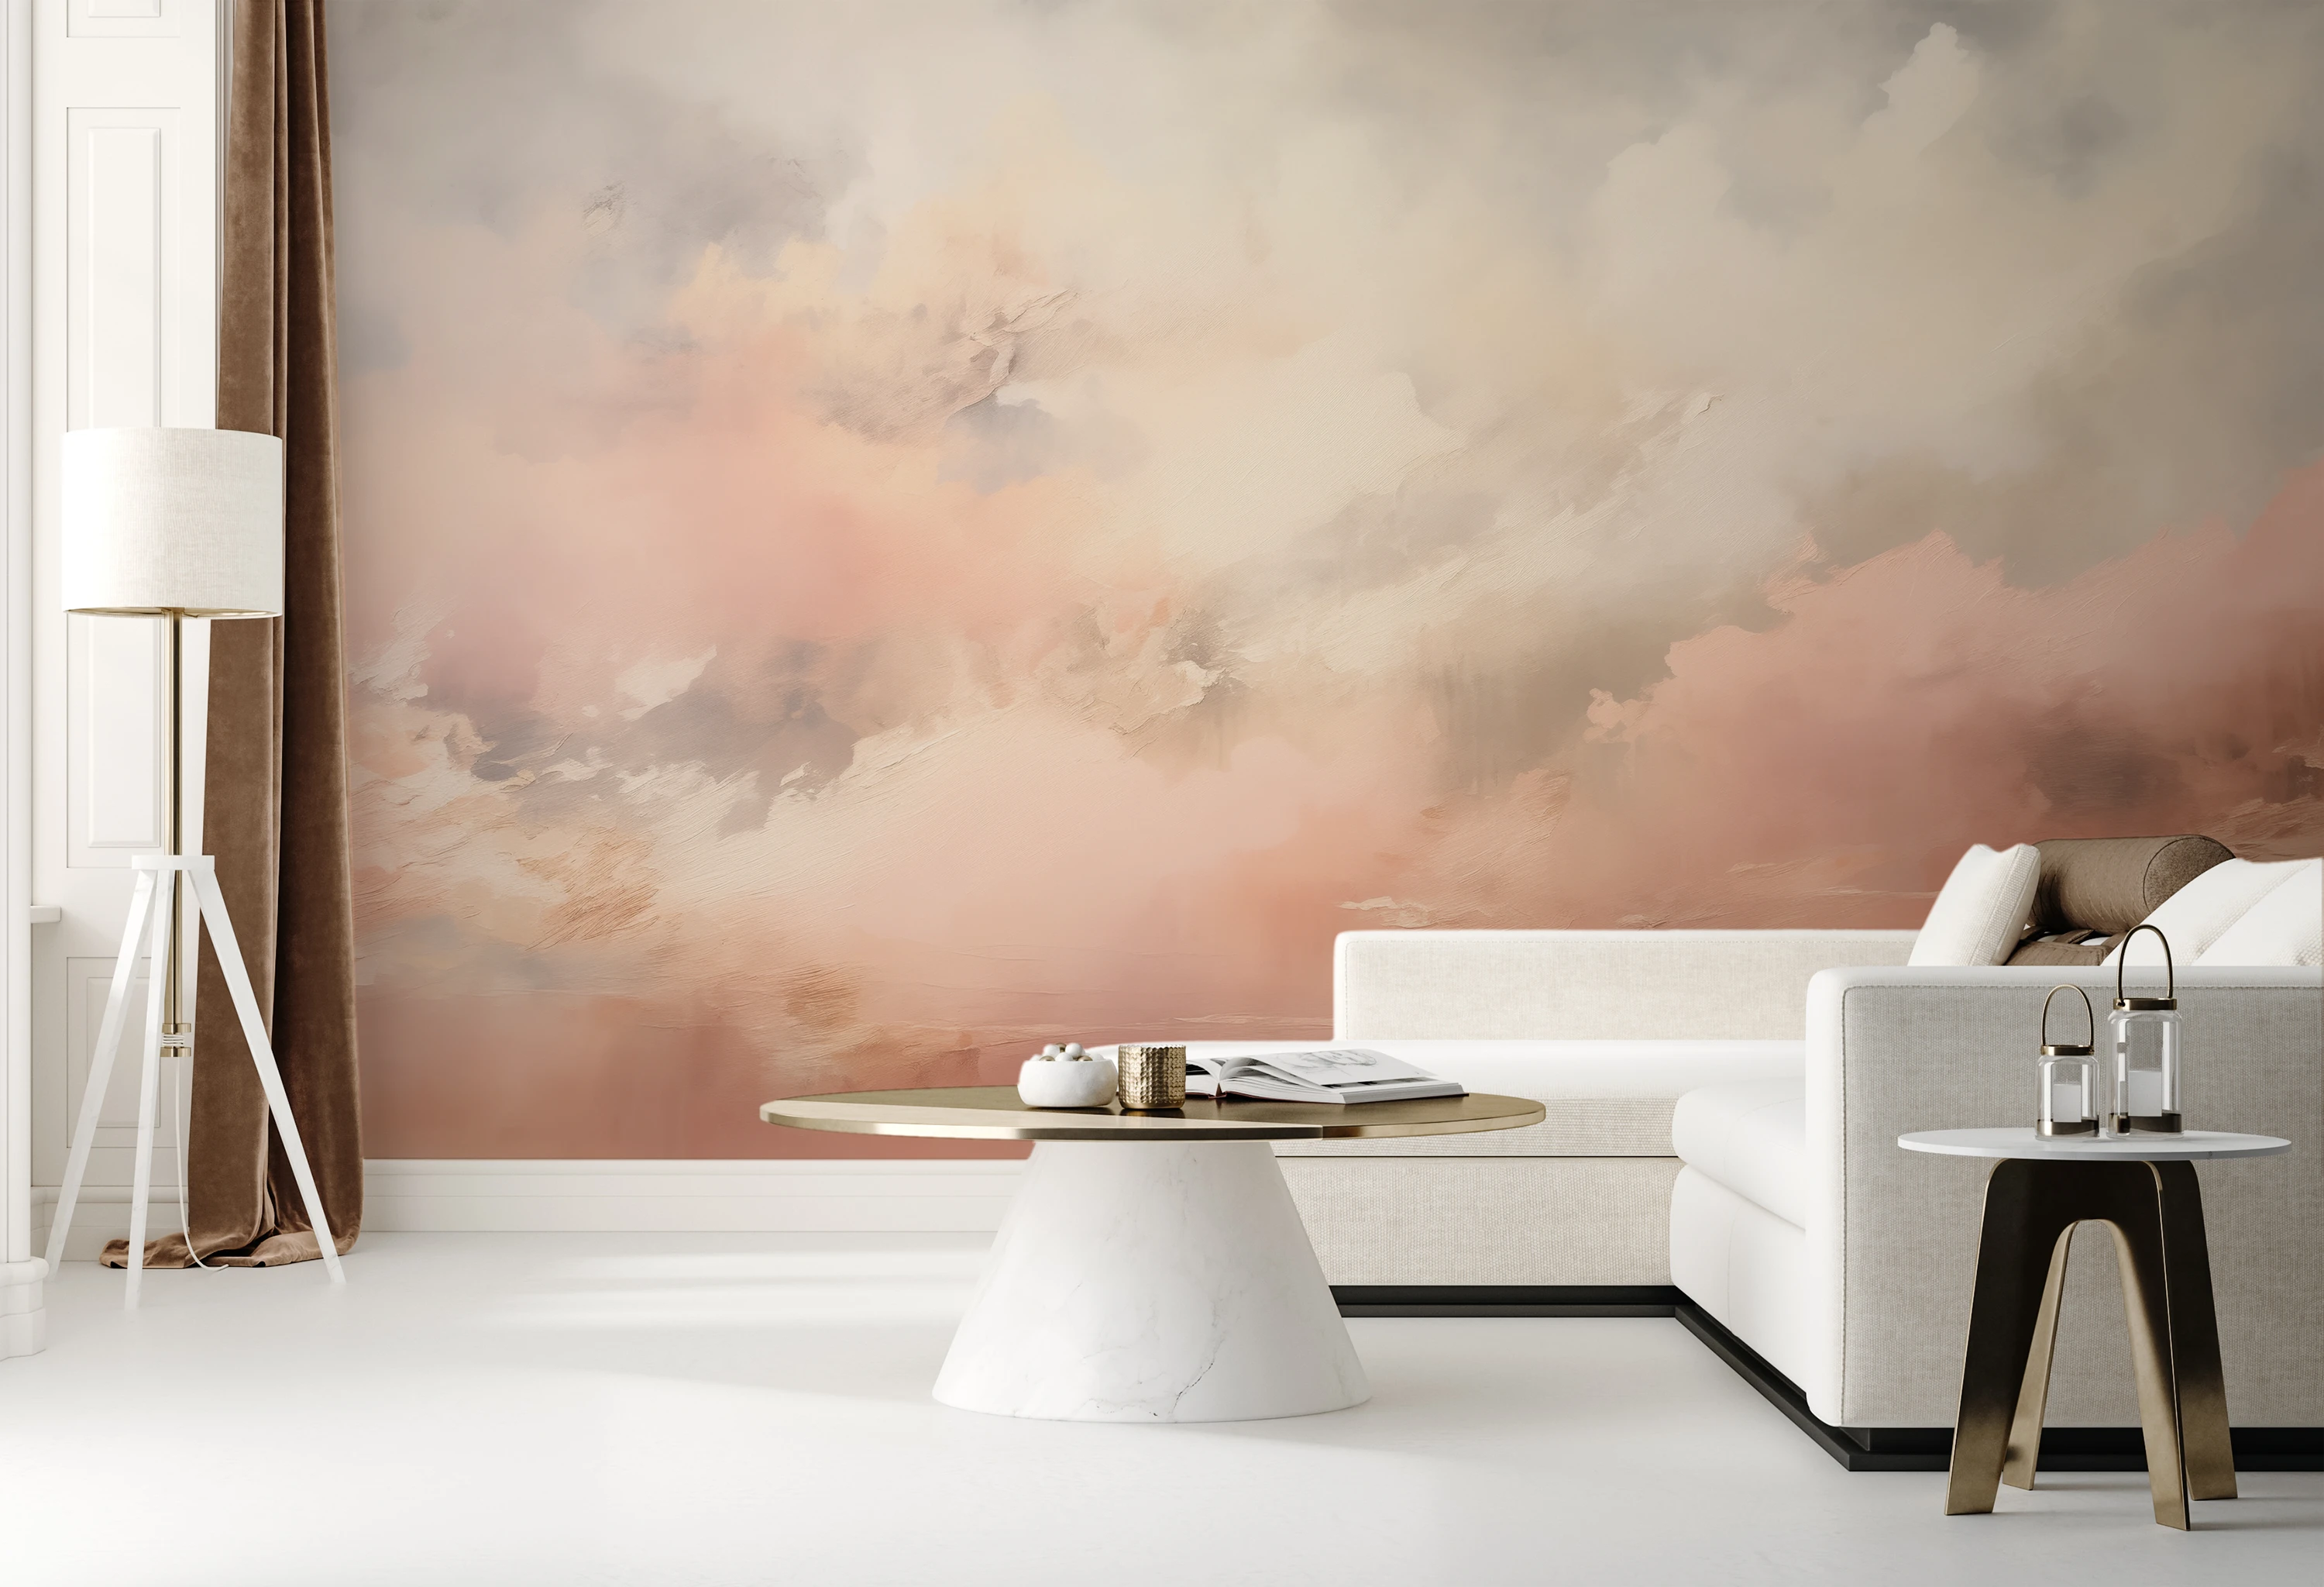 An example of using photo wallpaper from our "Clouds" collection in the living room